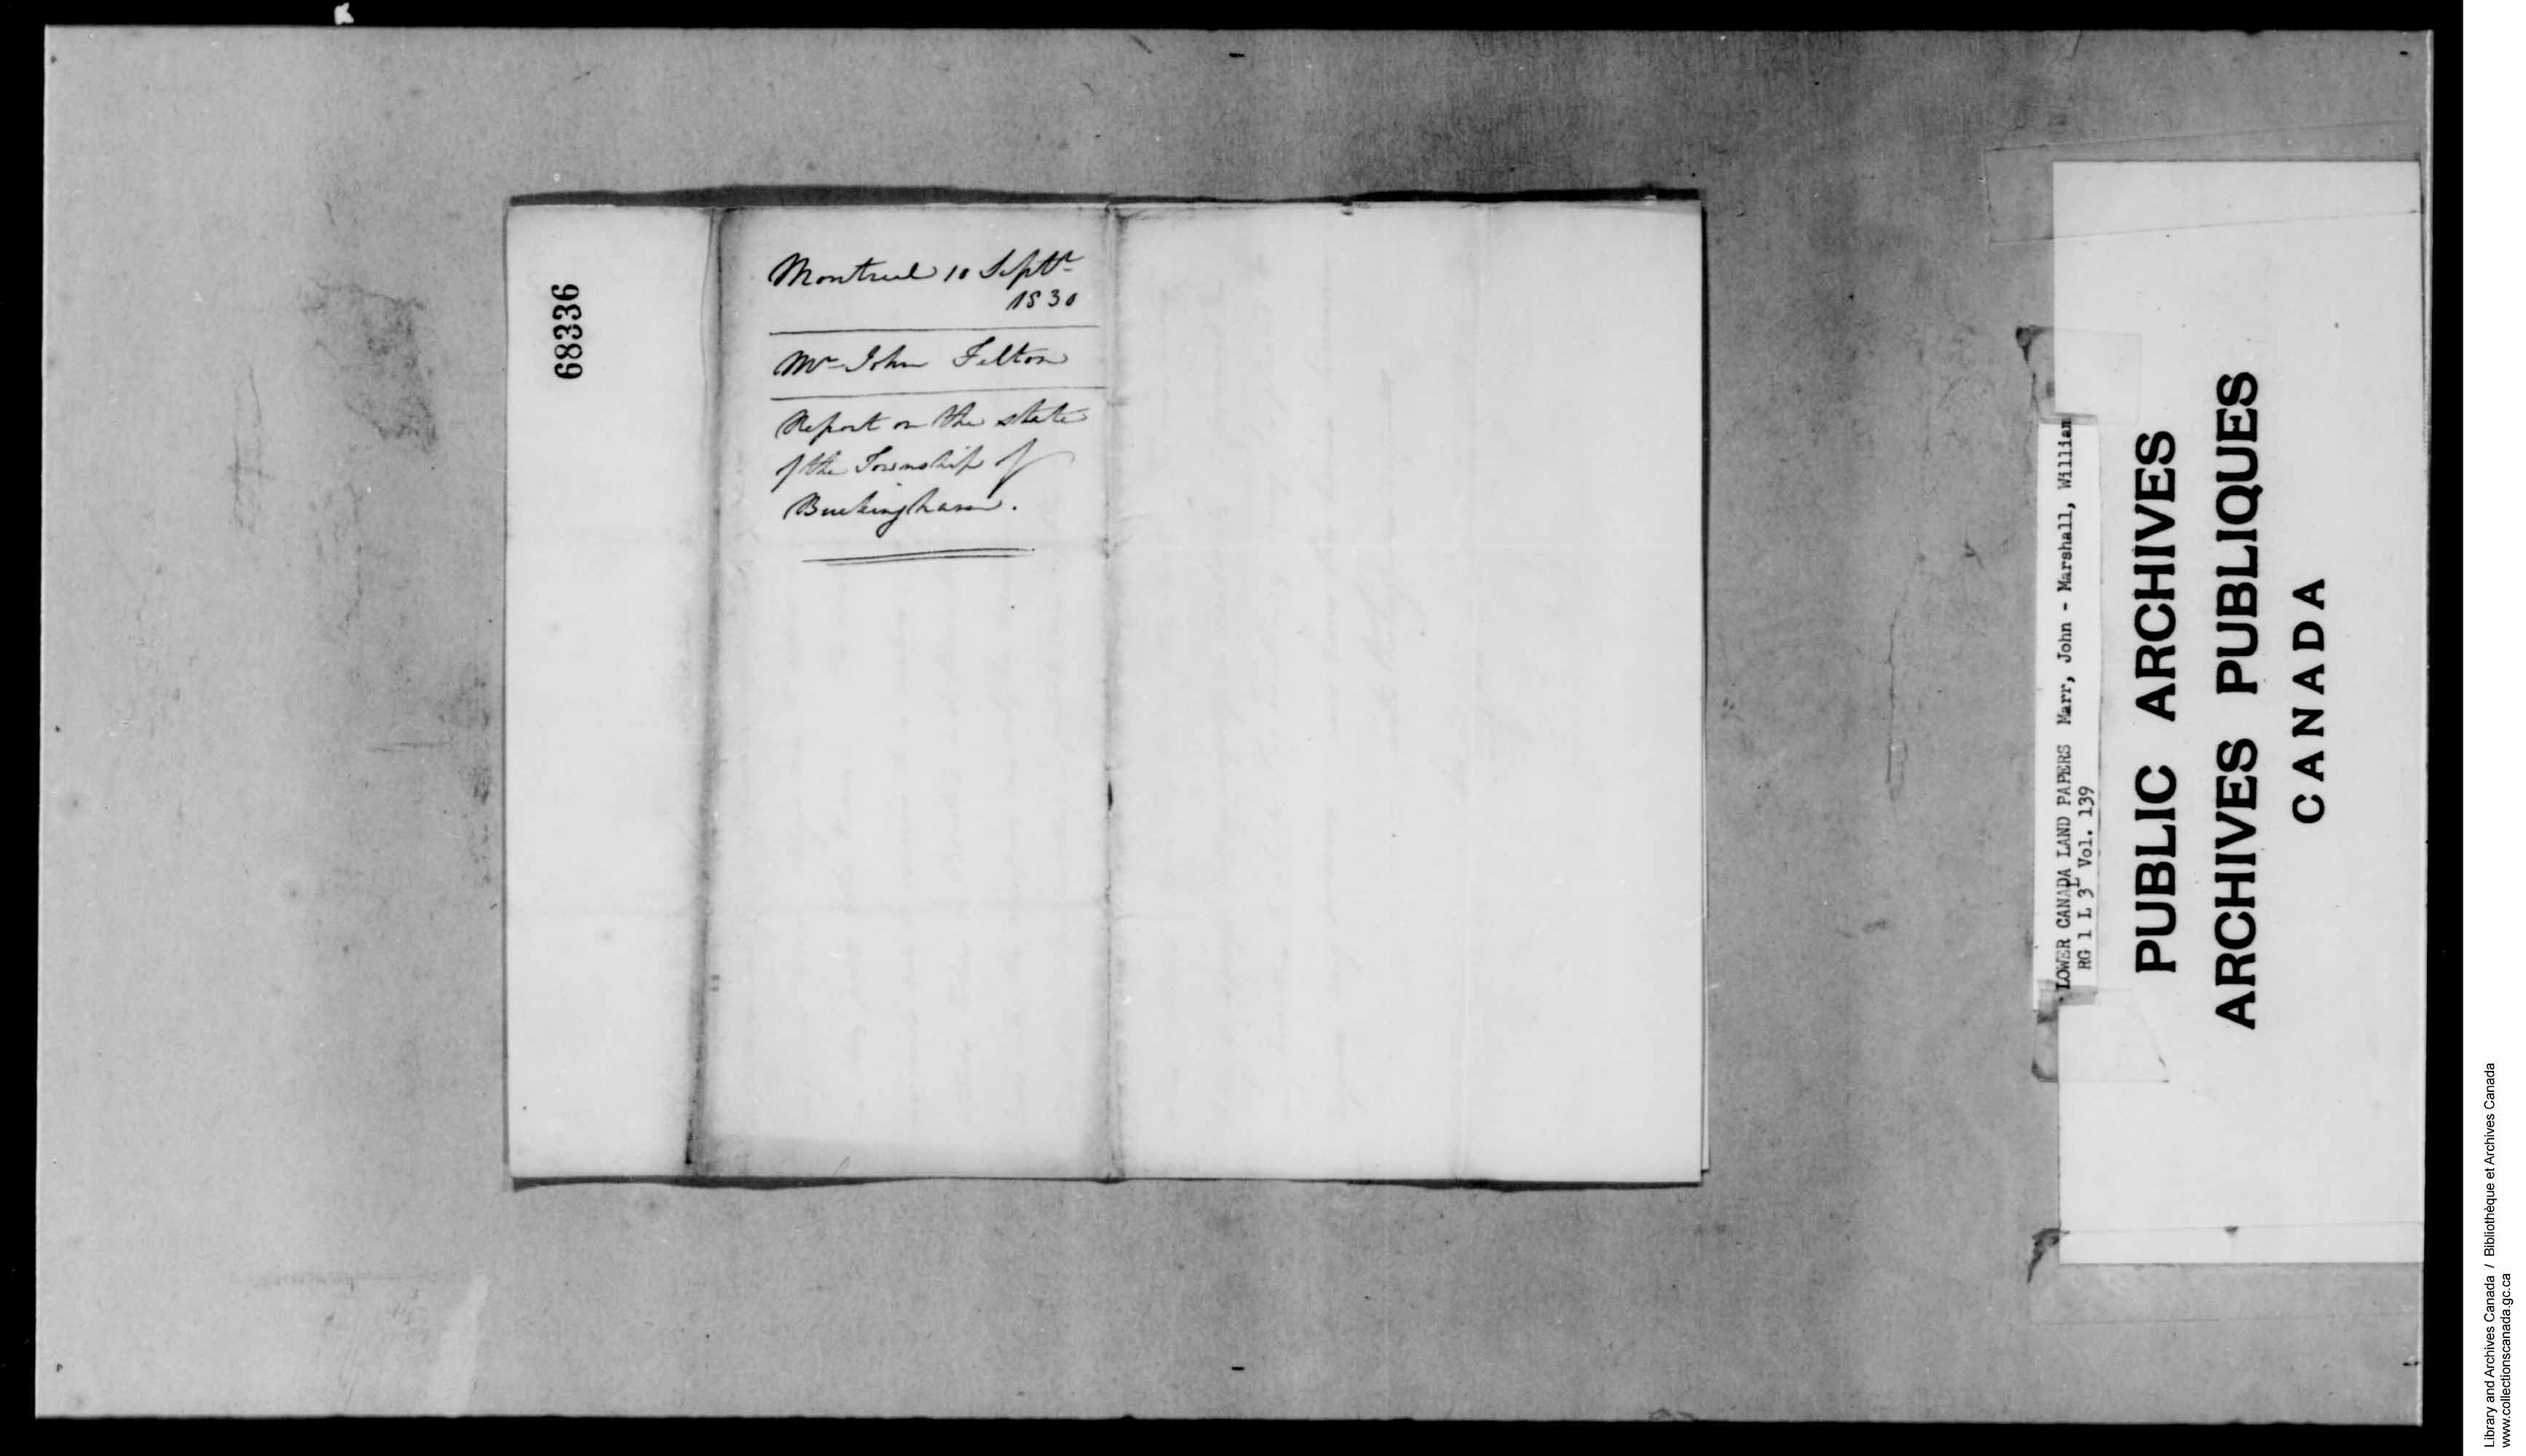 Digitized page of  for Image No.: e008713592